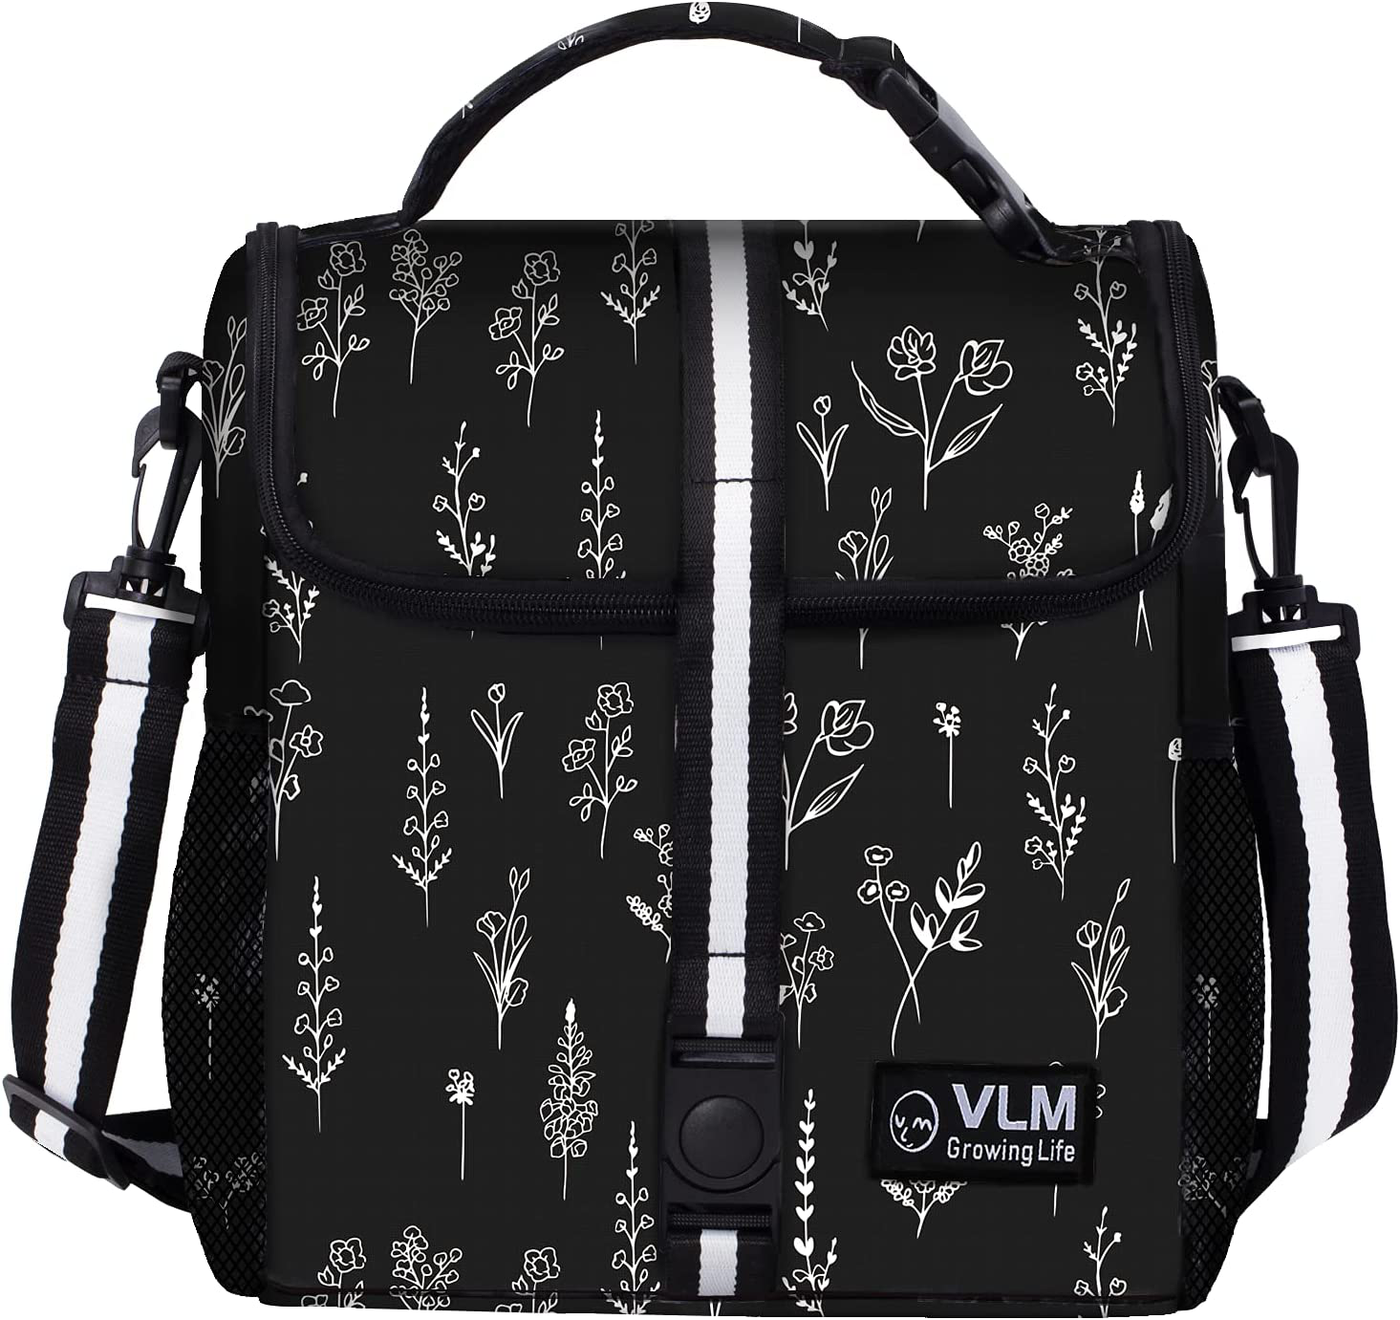 VLM Lunch Bags for Women,Leakproof Insulated Floral Lunch Box with Adjustable Shoulder Strap Reusable Zipper Cooler Tote Bag for Work,Picnic,Camping (Floral 2)